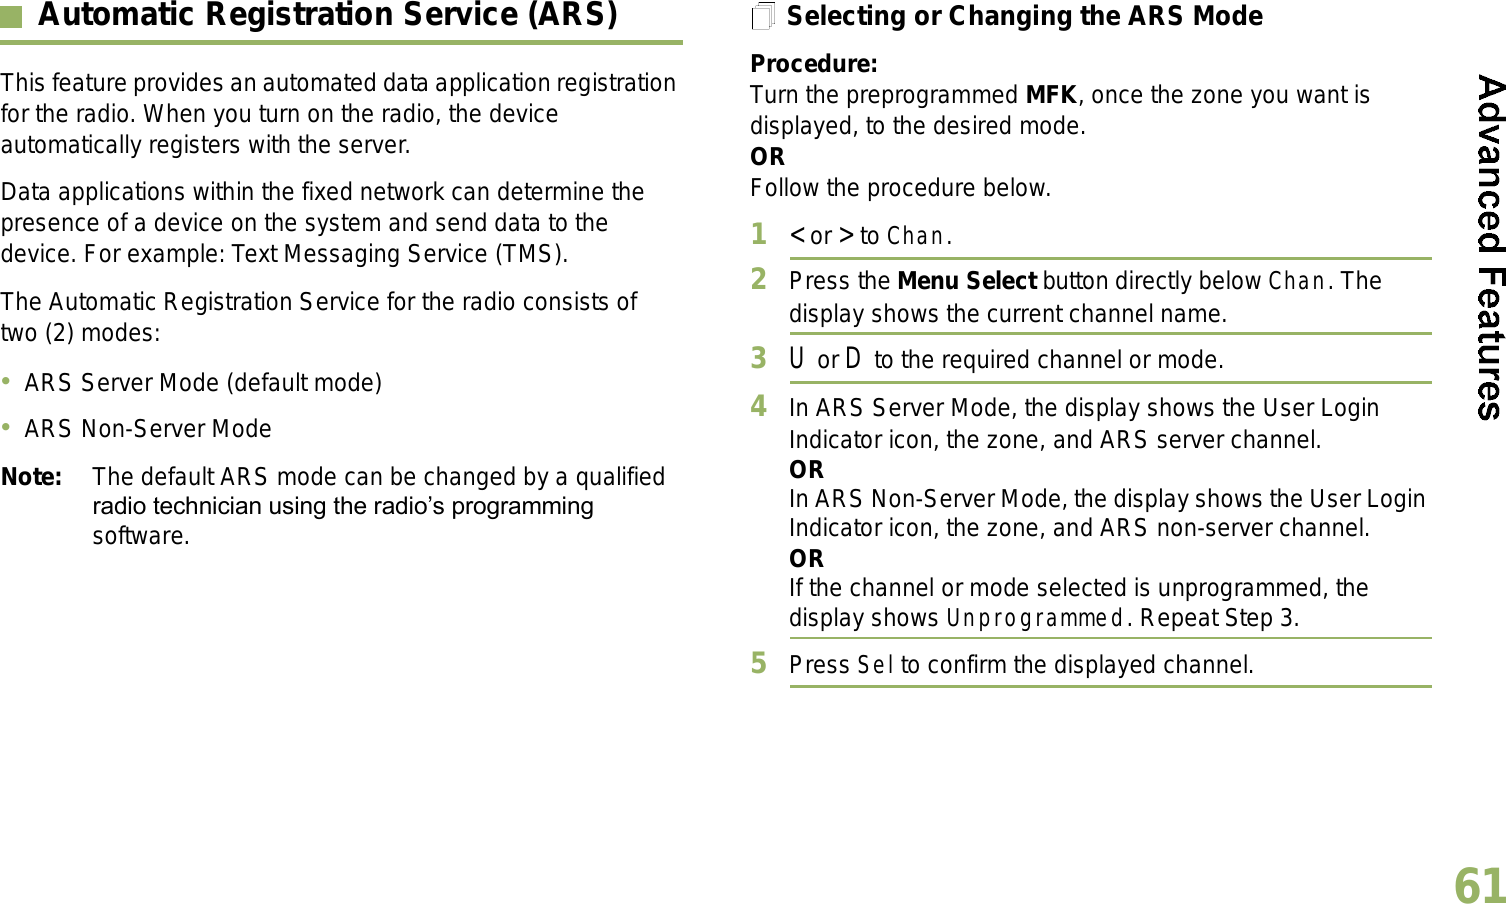 English61Automatic Registration Service (ARS)This feature provides an automated data application registration for the radio. When you turn on the radio, the device automatically registers with the server. Data applications within the fixed network can determine the presence of a device on the system and send data to the device. For example: Text Messaging Service (TMS).The Automatic Registration Service for the radio consists of two (2) modes: ARS Server Mode (default mode)ARS Non-Server ModeNote: The default ARS mode can be changed by a qualified radio technician using the radios programming software.Selecting or Changing the ARS ModeProcedure:Turn the preprogrammed MFK, once the zone you want is displayed, to the desired mode.ORFollow the procedure below.1&lt; or &gt; to Chan.2Press the Menu Select button directly below Chan. The display shows the current channel name.3U or D to the required channel or mode.4In ARS Server Mode, the display shows the User Login Indicator icon, the zone, and ARS server channel.ORIn ARS Non-Server Mode, the display shows the User Login Indicator icon, the zone, and ARS non-server channel.ORIf the channel or mode selected is unprogrammed, the display shows Unprogrammed. Repeat Step 3.5Press Sel to confirm the displayed channel.Advanced 